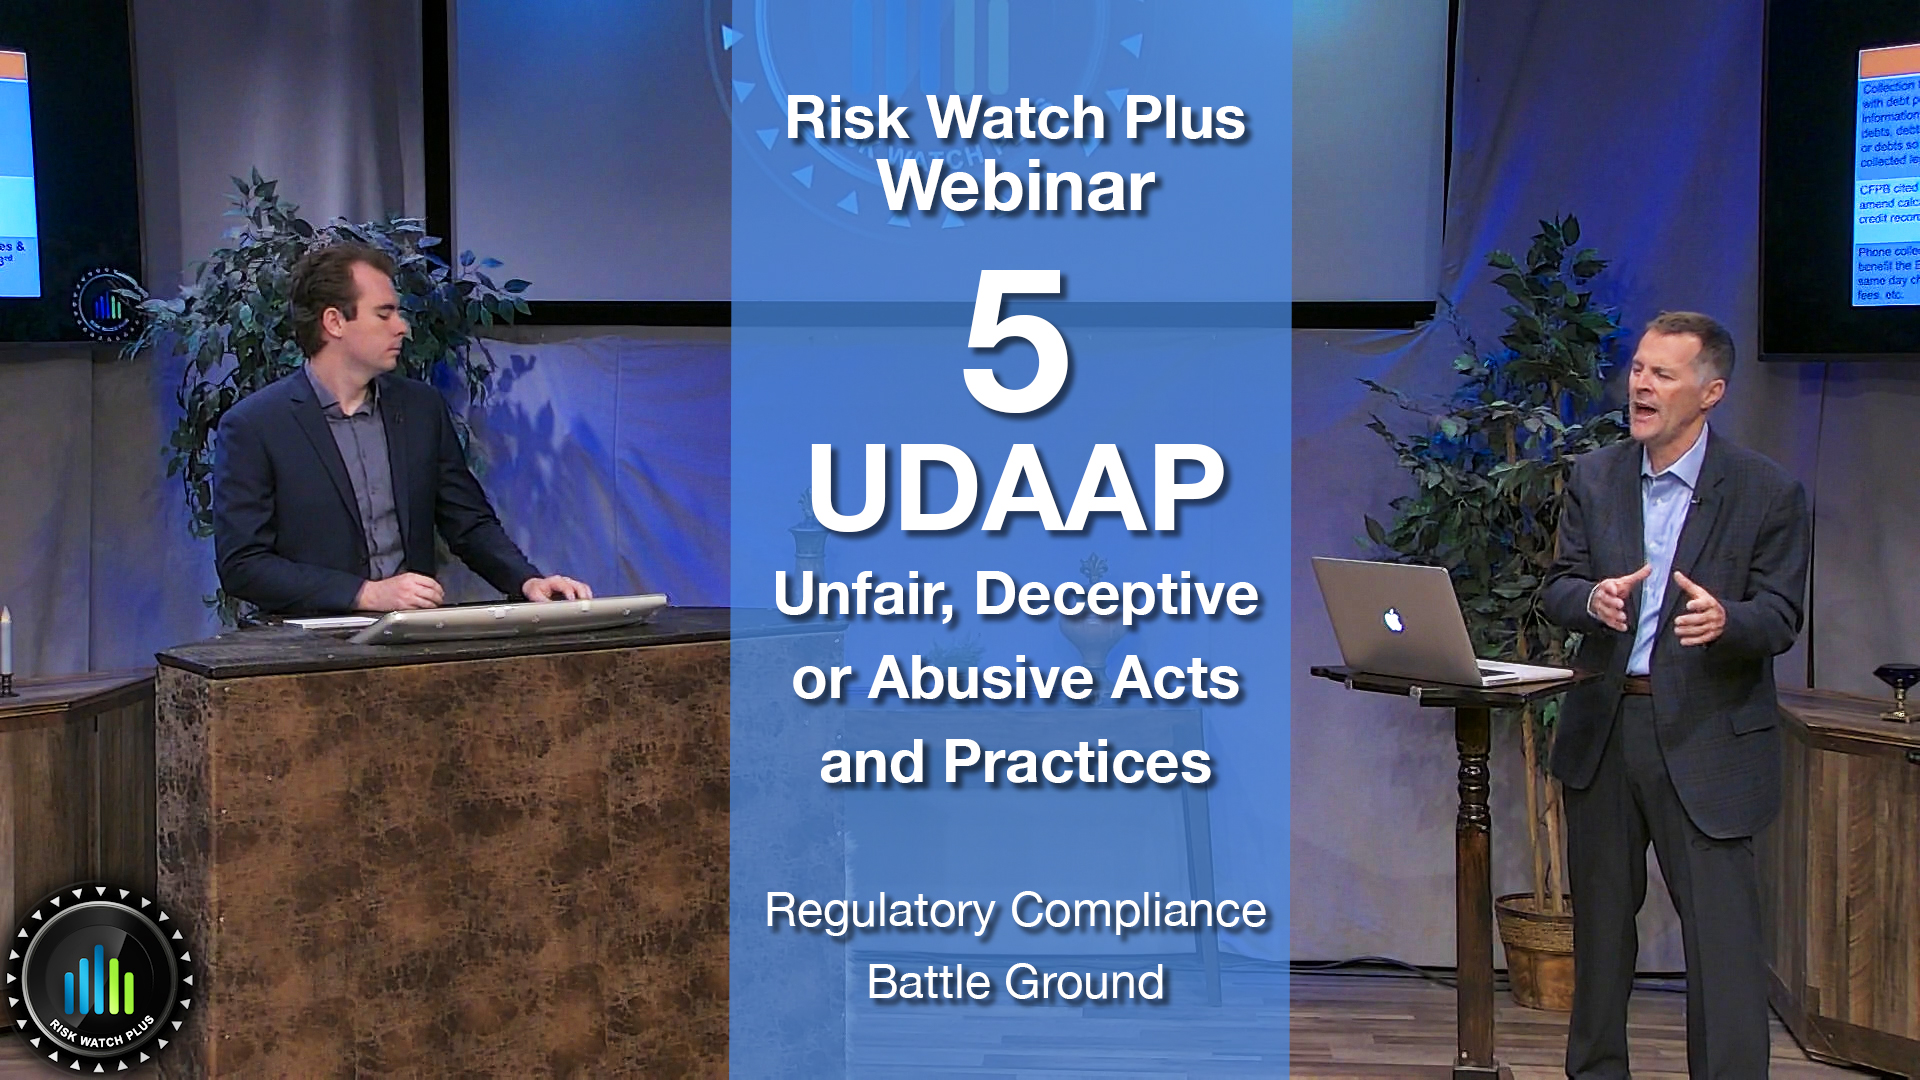 Risk Watch Plus Webinar 5: UDAAP (Unfair, Deceptive, or Abusive Acts and Practices) (Certificated)